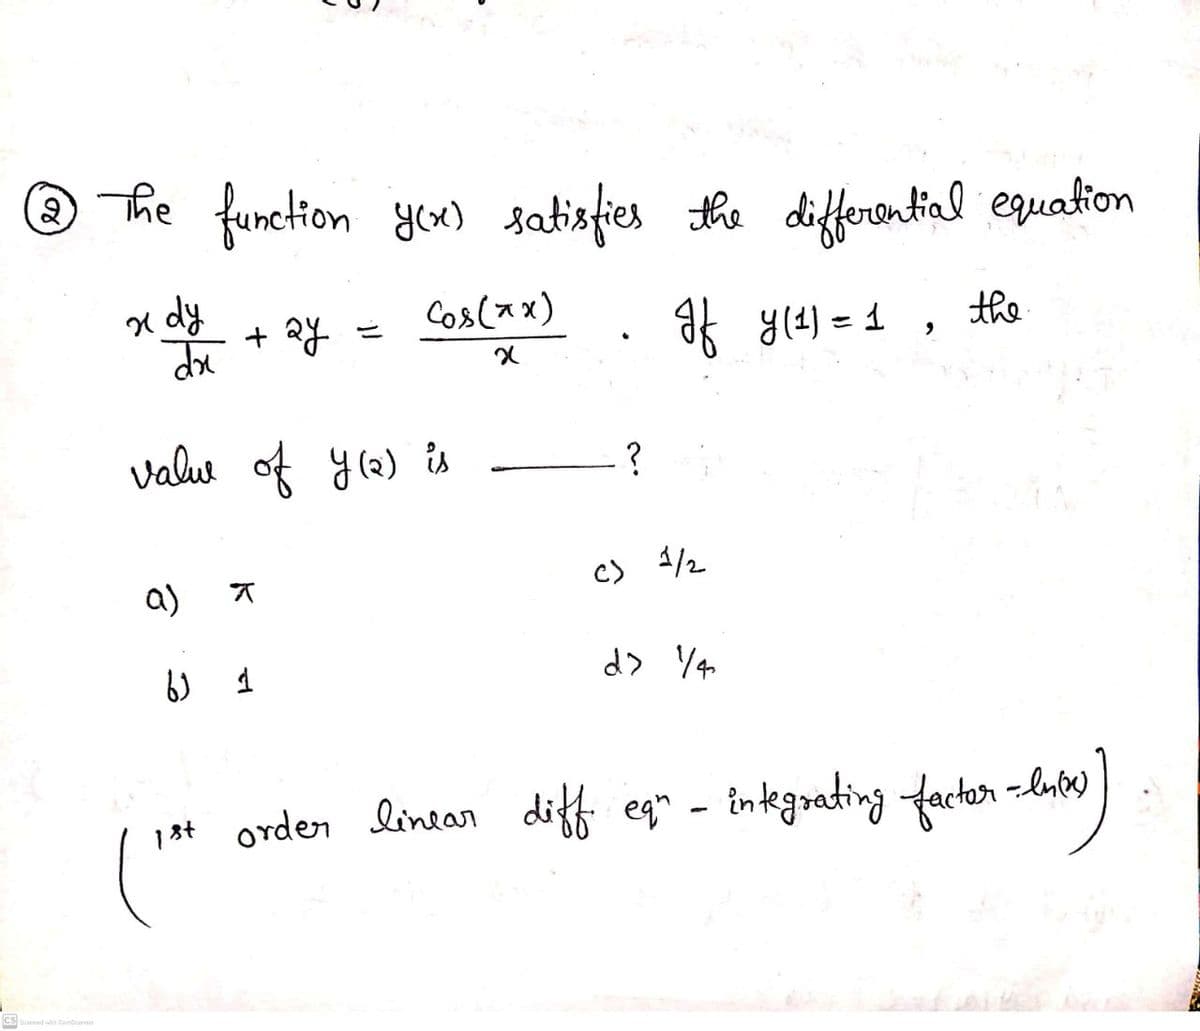 2)
@ The function yex) satisfies the differontial equation
x dy
Cos(ax)
ak y(4) = 1
the
valut of y(2) is
a)
c)
4/2
6) 1
1st orden linear diff egn - in tegoating factor -lub)
CS
